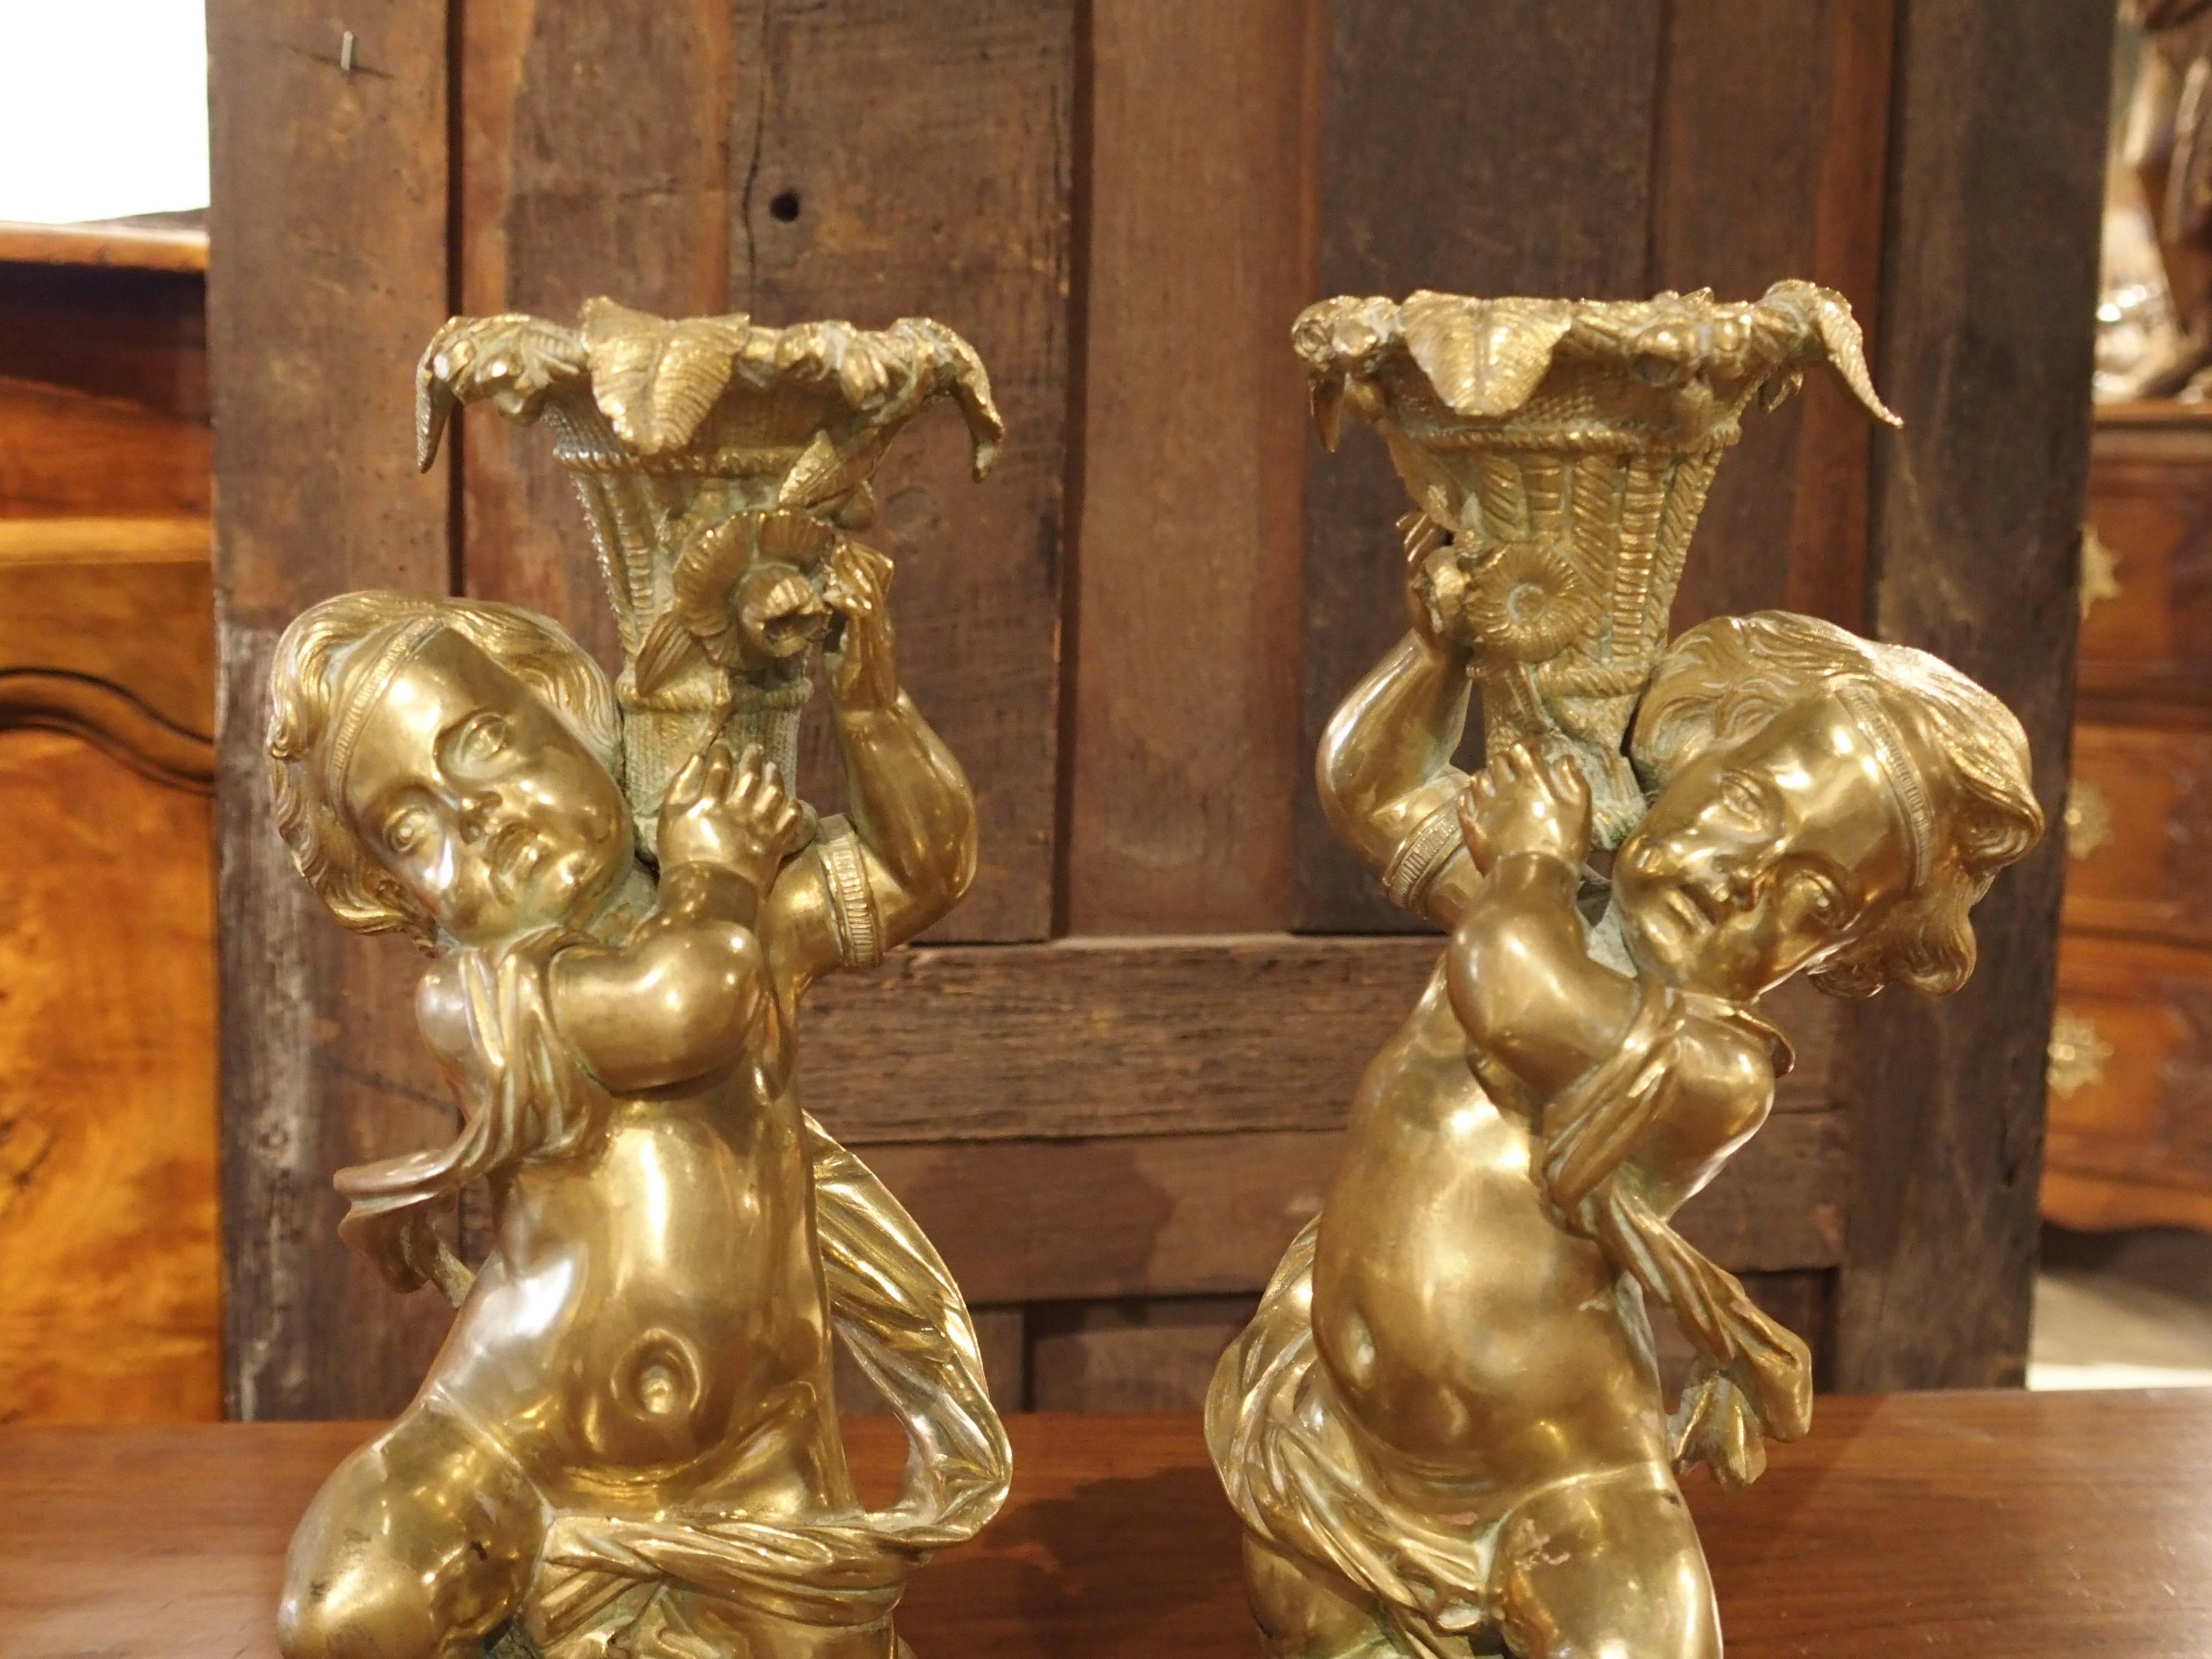 These charming gilt bronze candlestick holders are French and date to the mid-1800s. They are a refined quality and have a very nice color. Each depicts a well detailed putti on a foliate mound with a classic drape surrounding them. They are holding